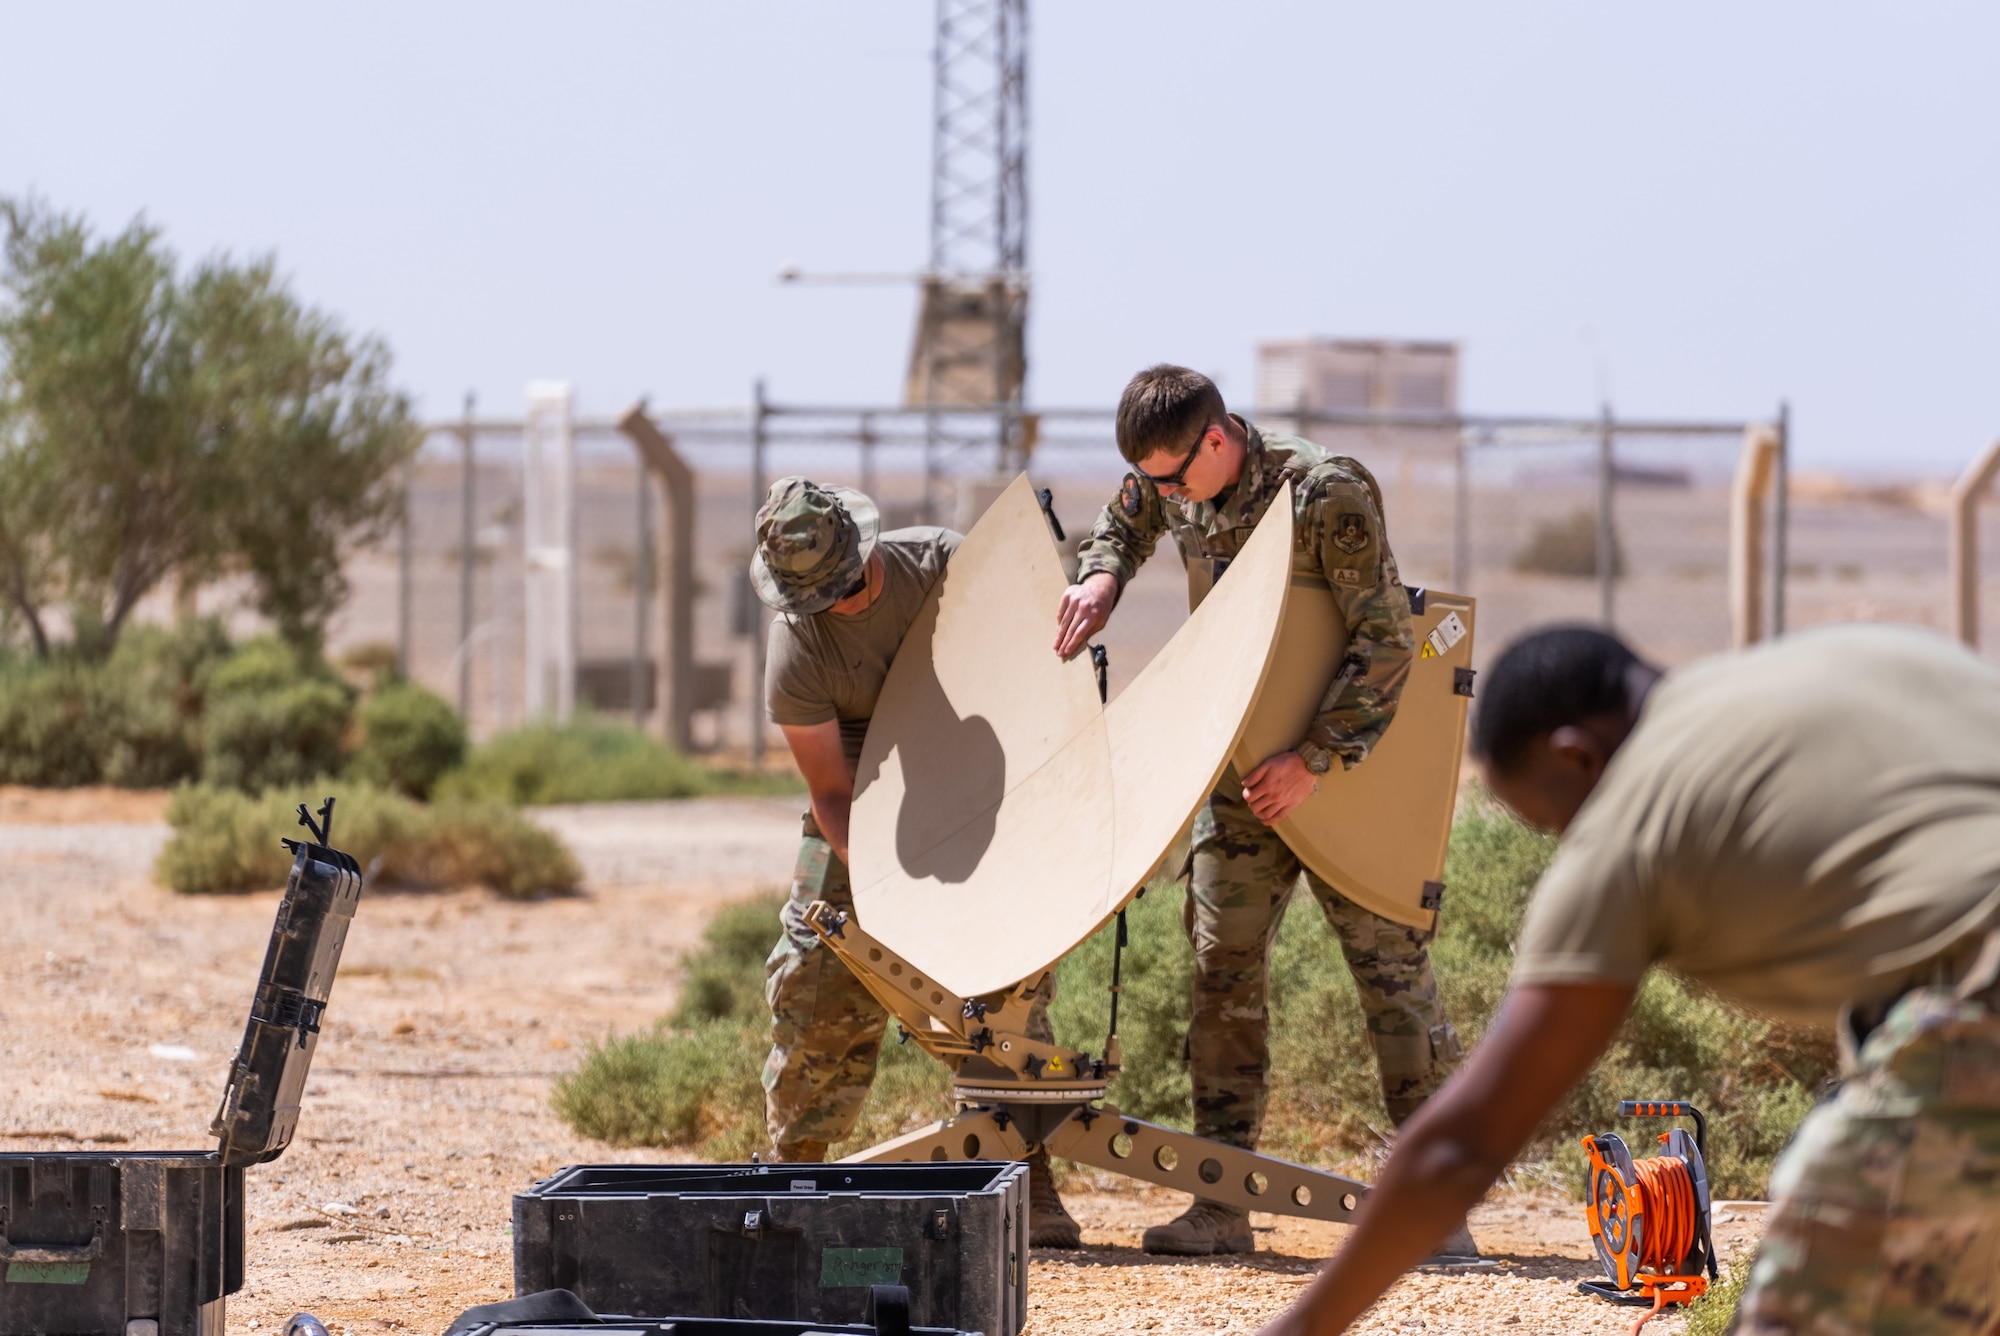 U.S. Air Force Airmen with the 332d Expeditionary Communications Squadron constructs a Communications Fly-away Kit (CFK) during a training exercise designed around Agile Combat Employment, at an undisclosed location in Southwest Asia, September 27-28, 2022. A CFK was established and provides satellite communications anywhere in the world, even in austere environments with little or no infrastructure. (U.S Air Force Photo by Tech Sgt. Melissa Isidro)